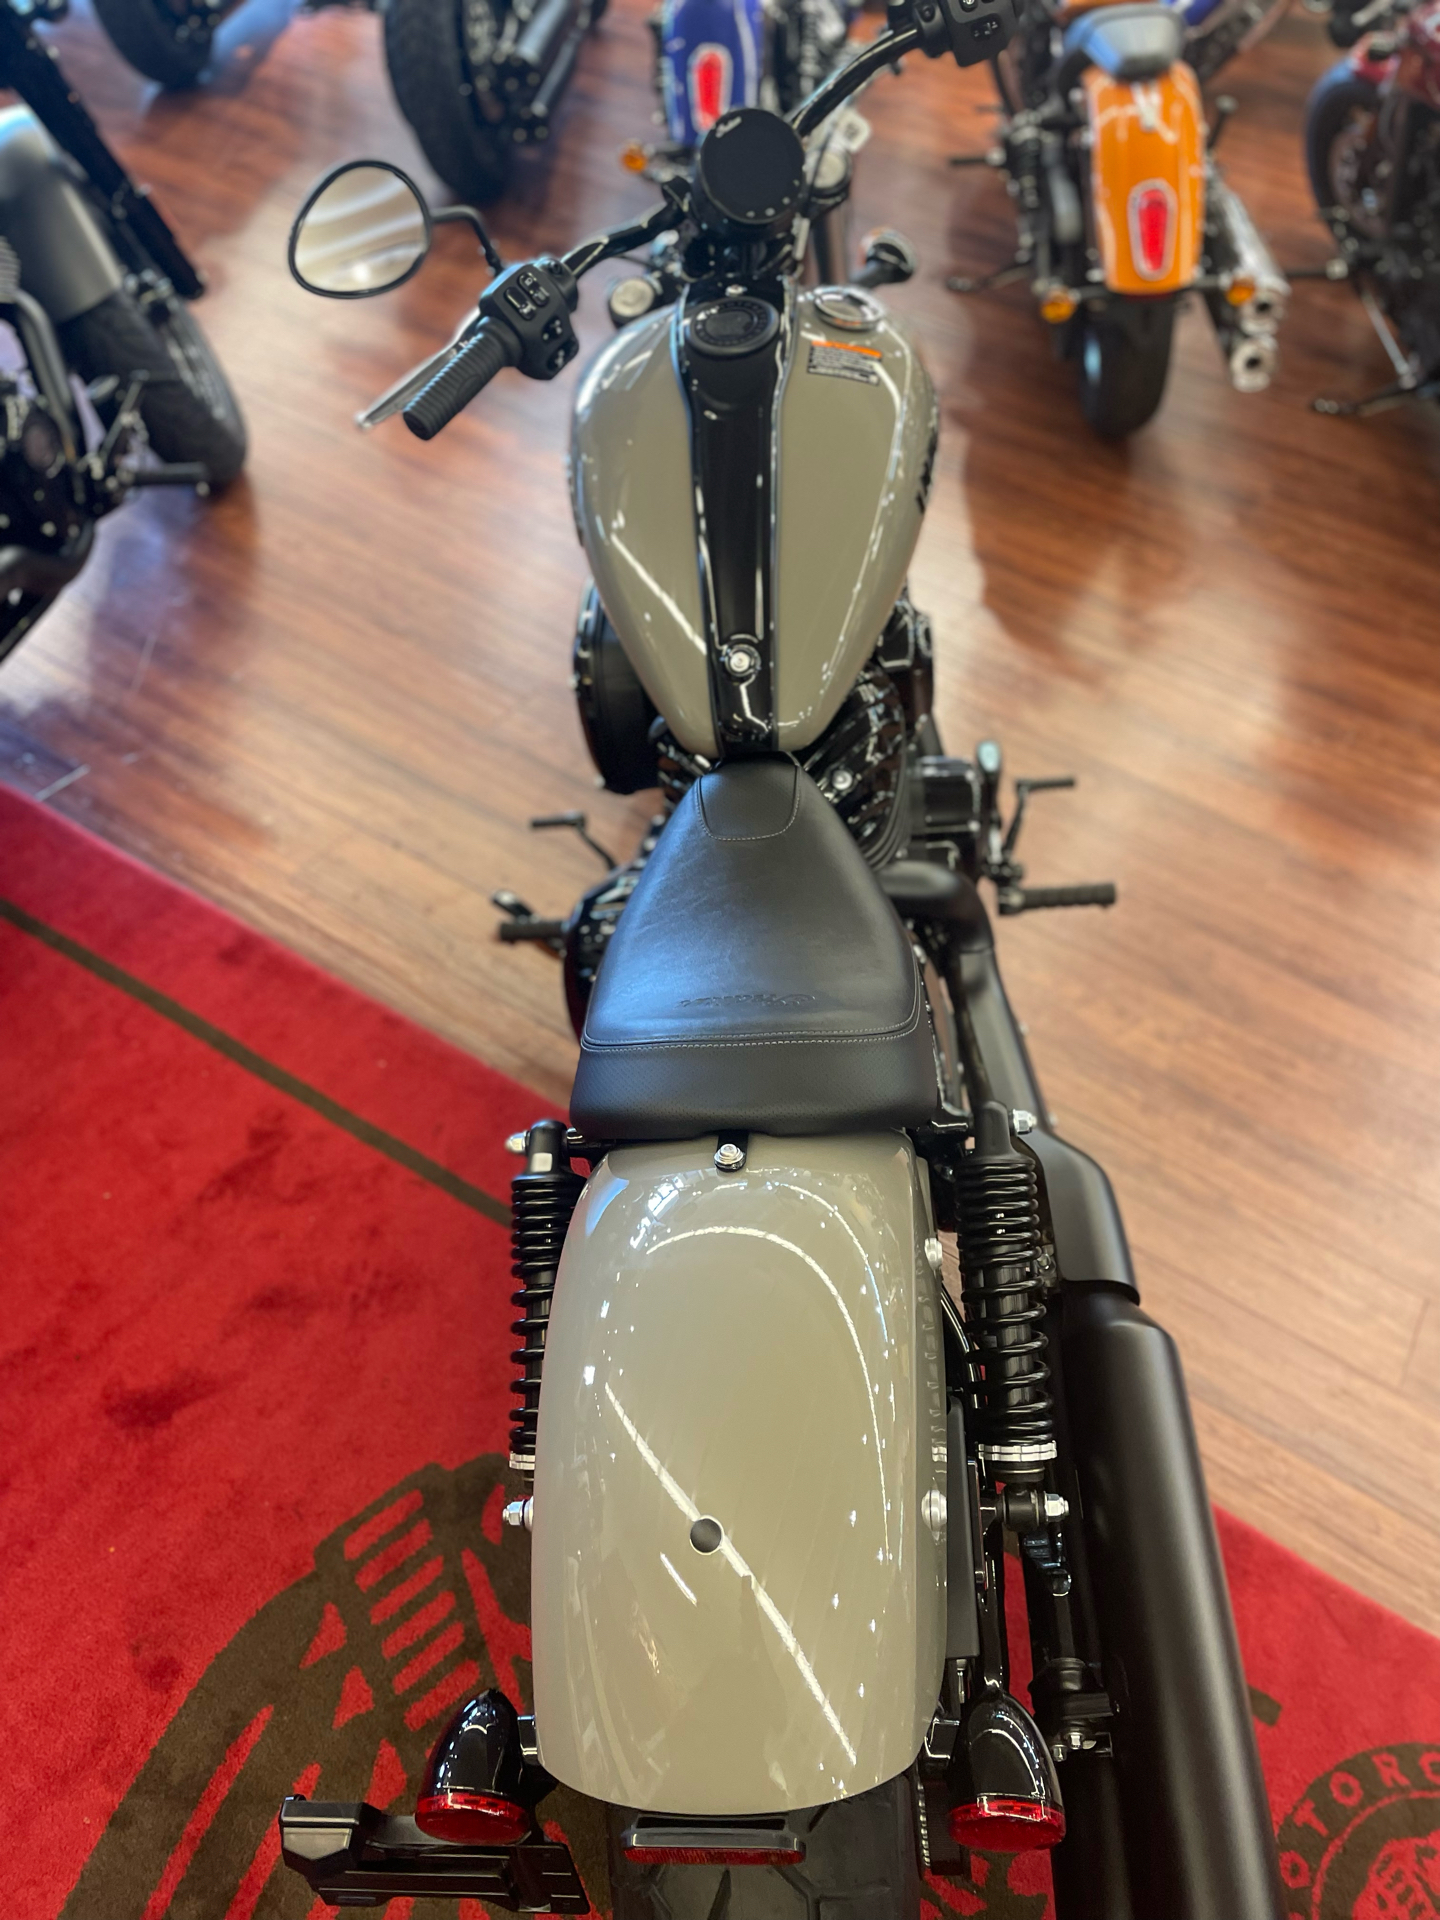 2023 Indian Motorcycle Chief Dark Horse® in Nashville, Tennessee - Photo 4